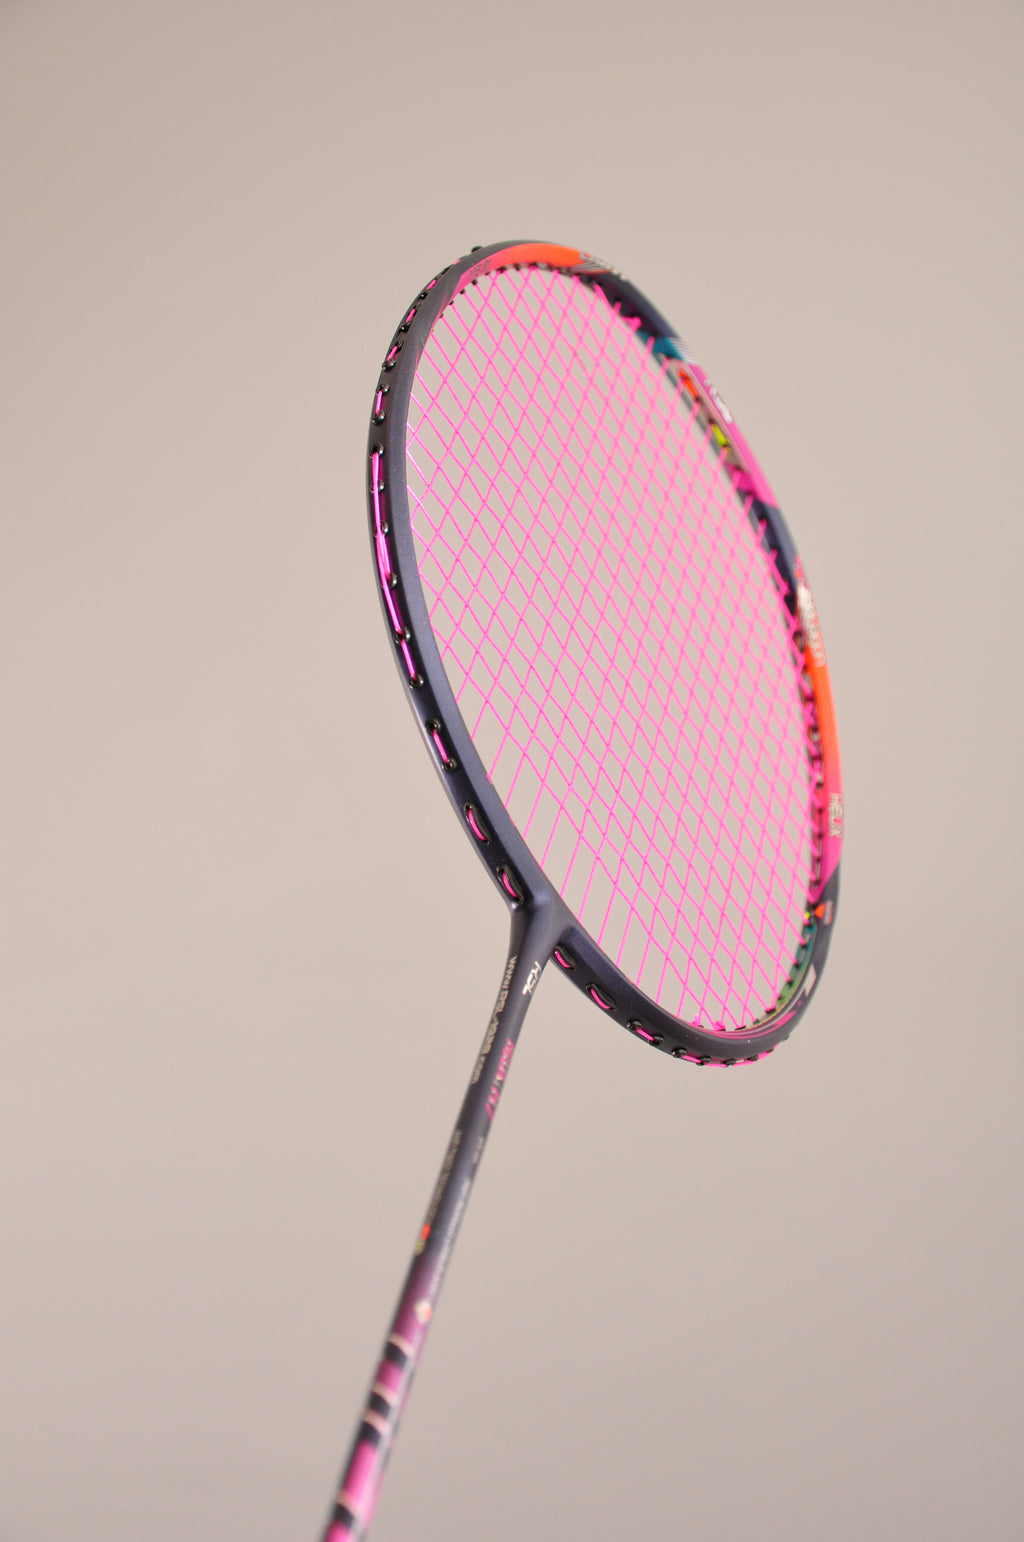 RSL Helix H7 badminton racket, Free shorts, grip and string. - badminton racket review